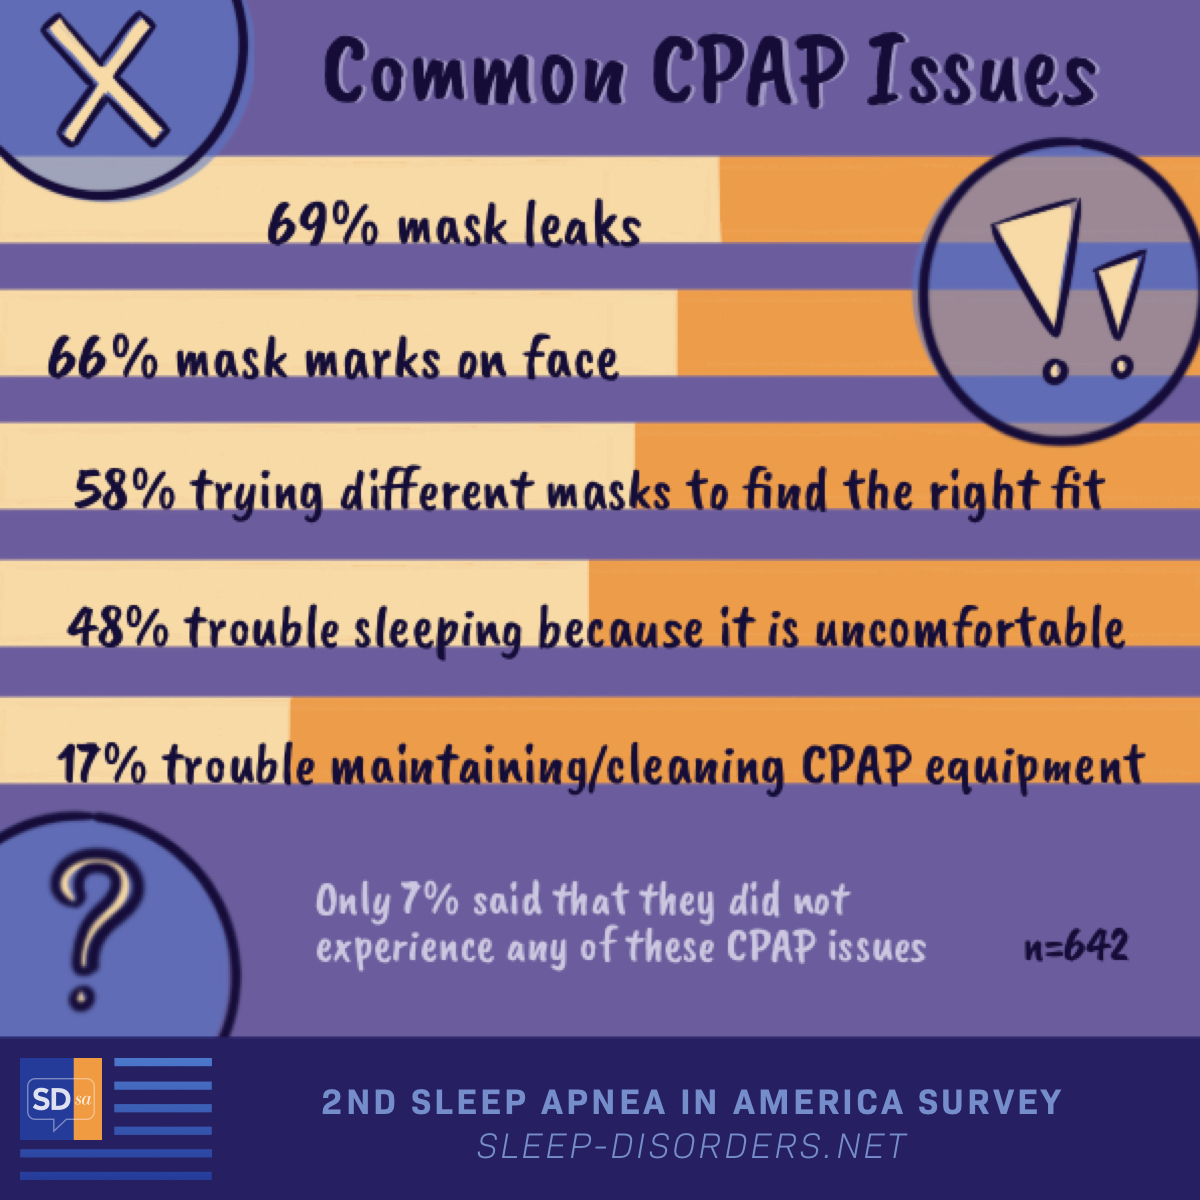 According to the 2nd Sleep Disorders In America survey, common CPAP issues include mask leaks, marks on the face, trying different masks, trouble sleeping, and trouble maintaining equipment.